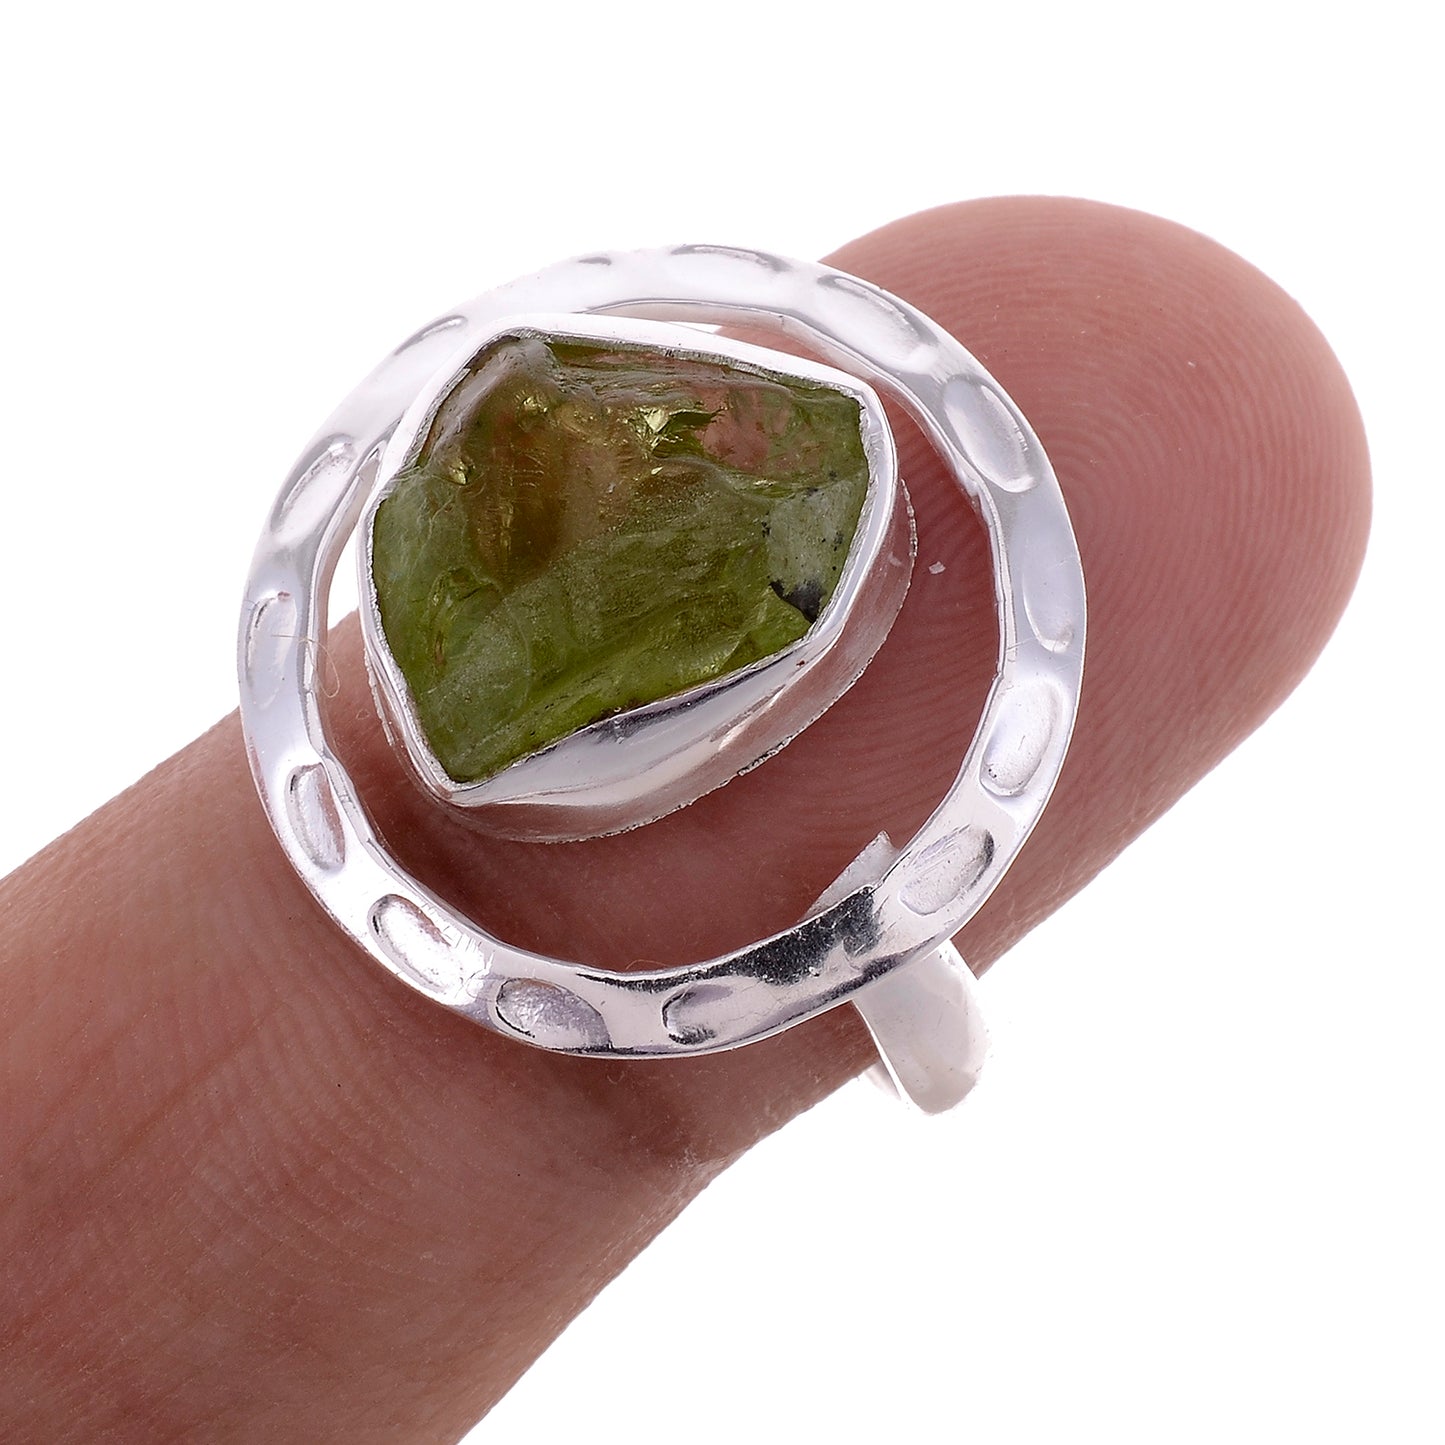 Sterling Silver Raw Gemstone Hand Hammered Ring - Available in 6 stone